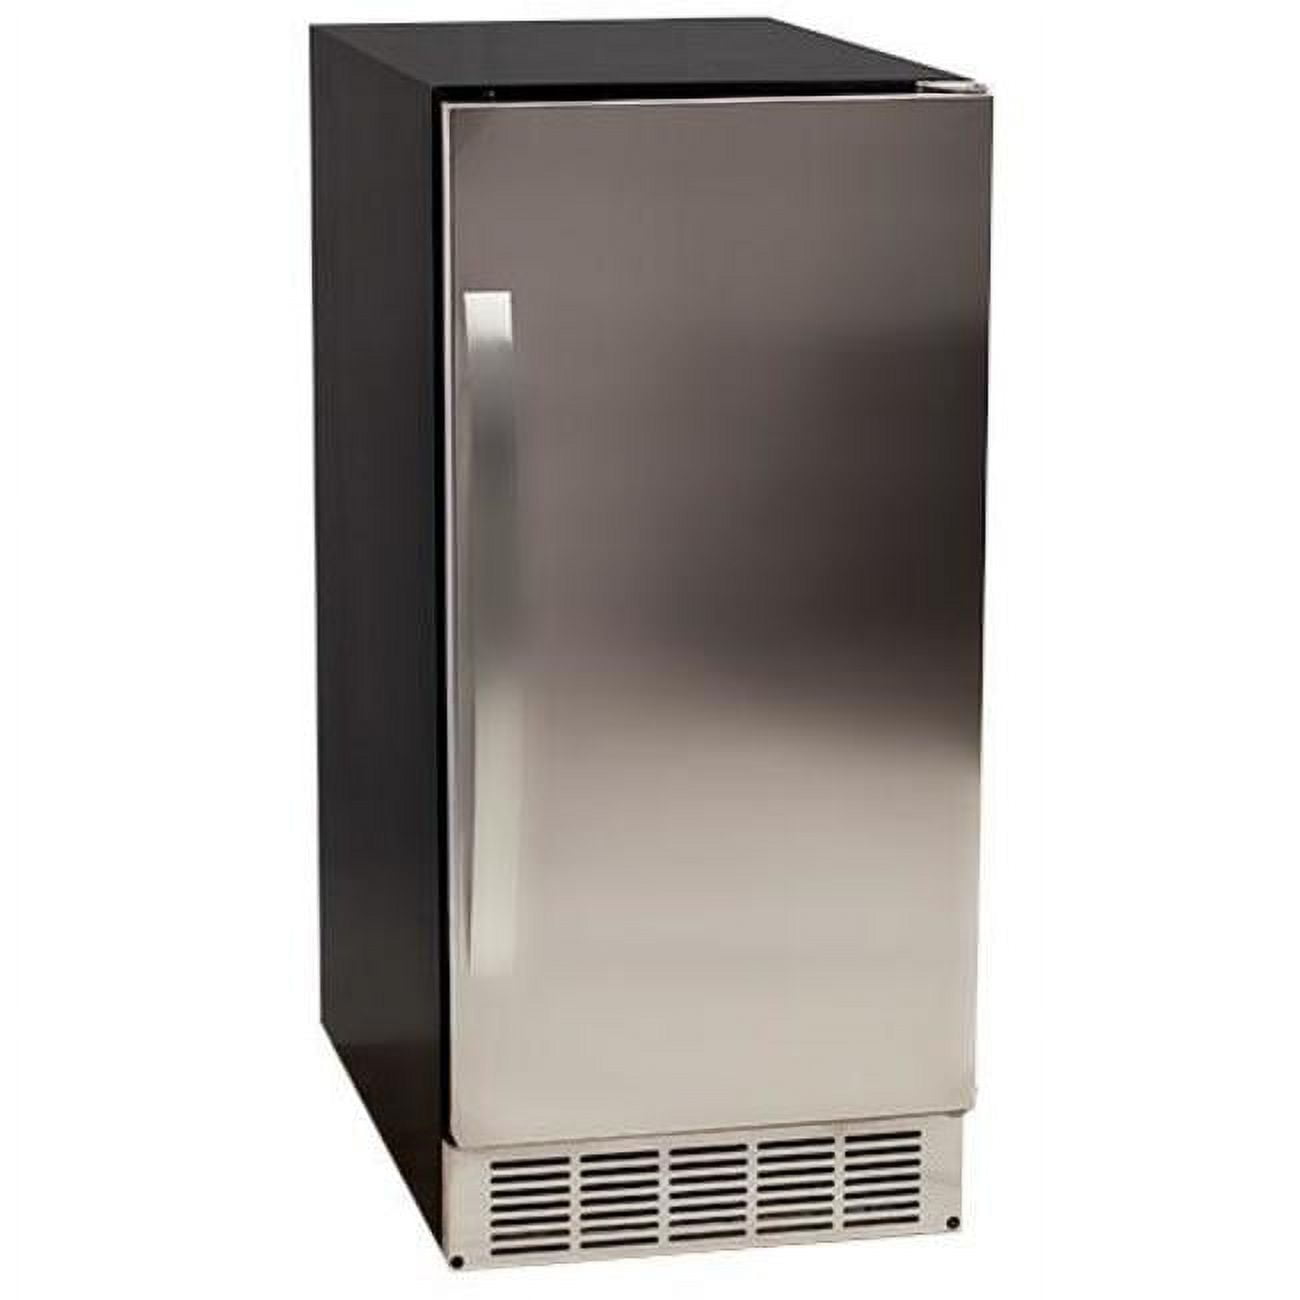 EdgeStar IB250SSOD 15 Inch Wide 20 Lbs. Built-in Outdoor Ice Maker with 25  Lbs. Daily Ice Production - No Drain Required